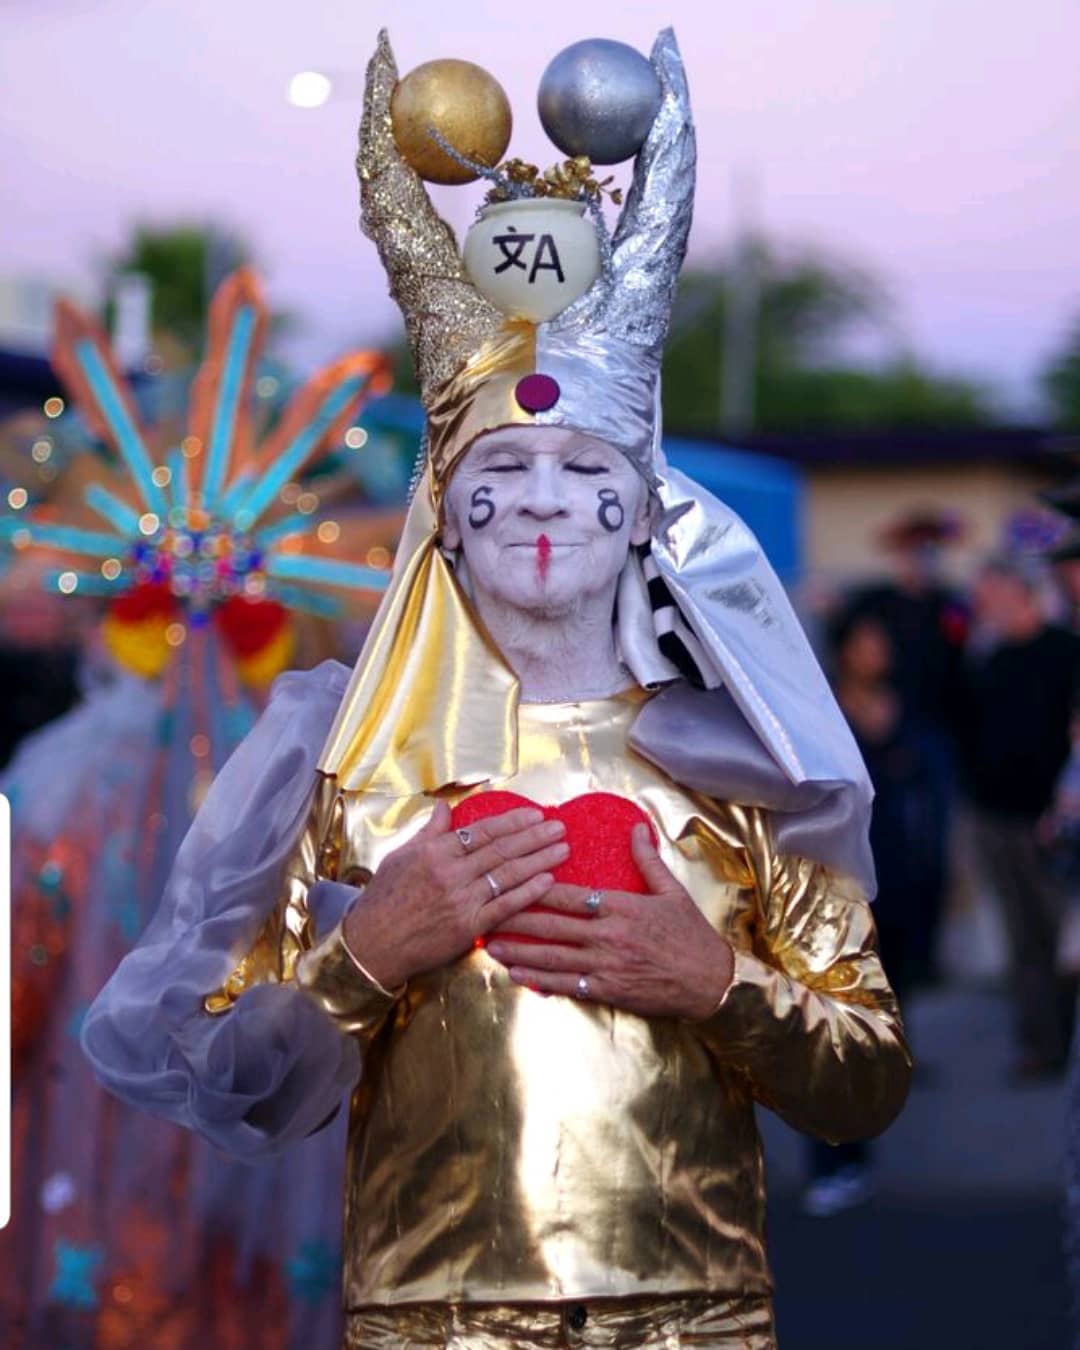 Man dressed in white and gold holding a heart for a festival. Photo by Instagram user @allsoulsprocessiontucson